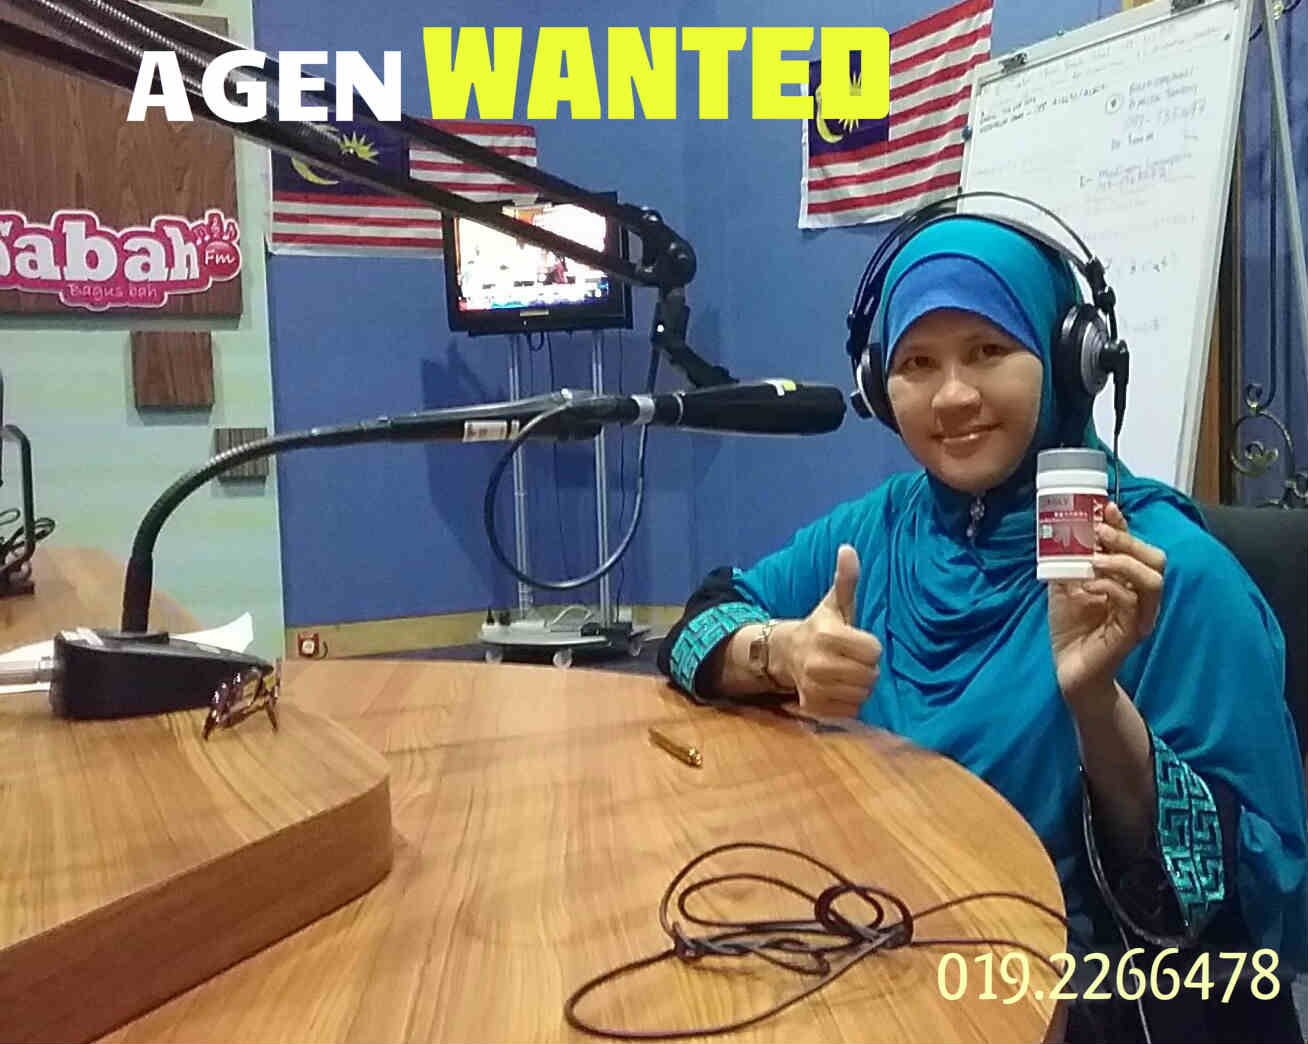 SMS/WHTSAPP  019-2266478